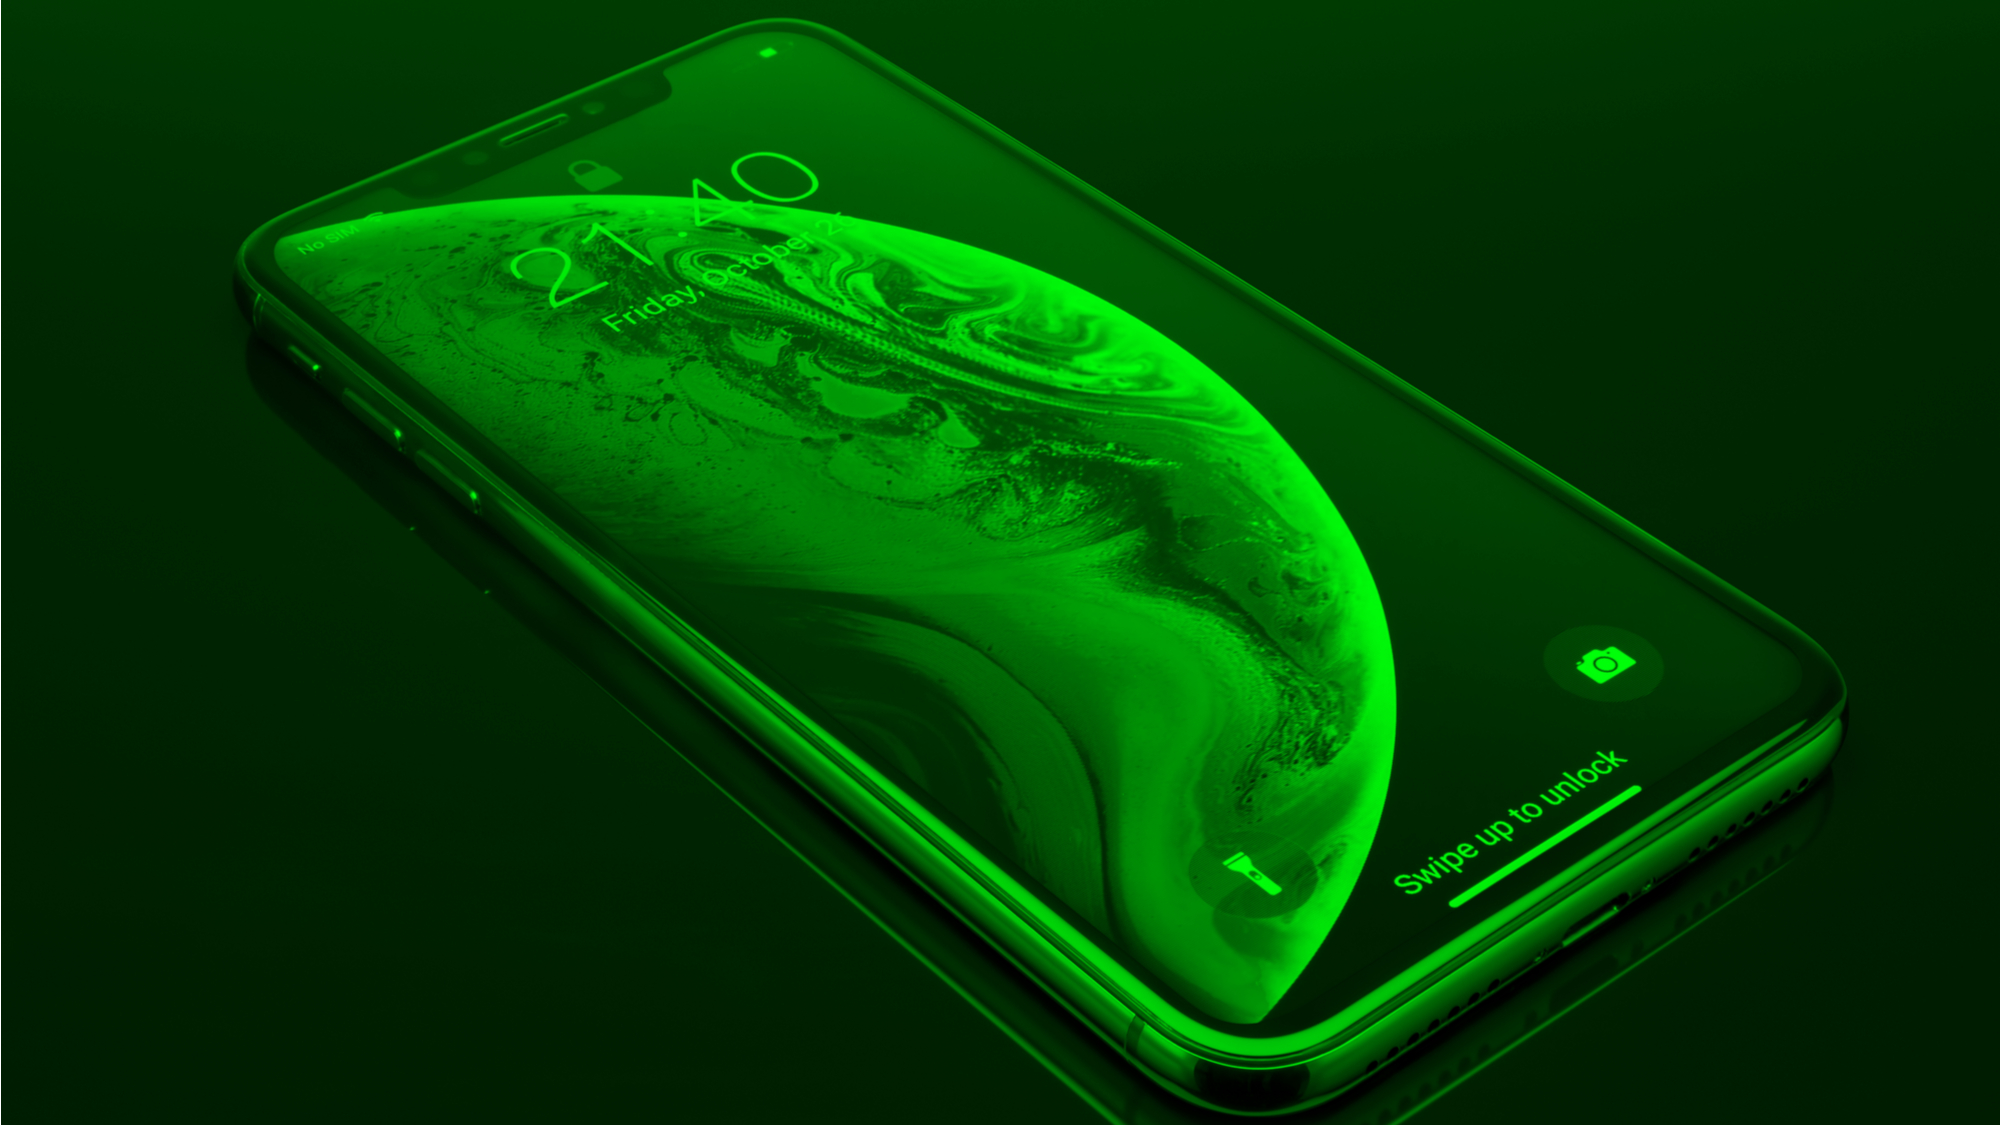 Fix the iPhone ‘Green Tint’ Bug With an iOS Update